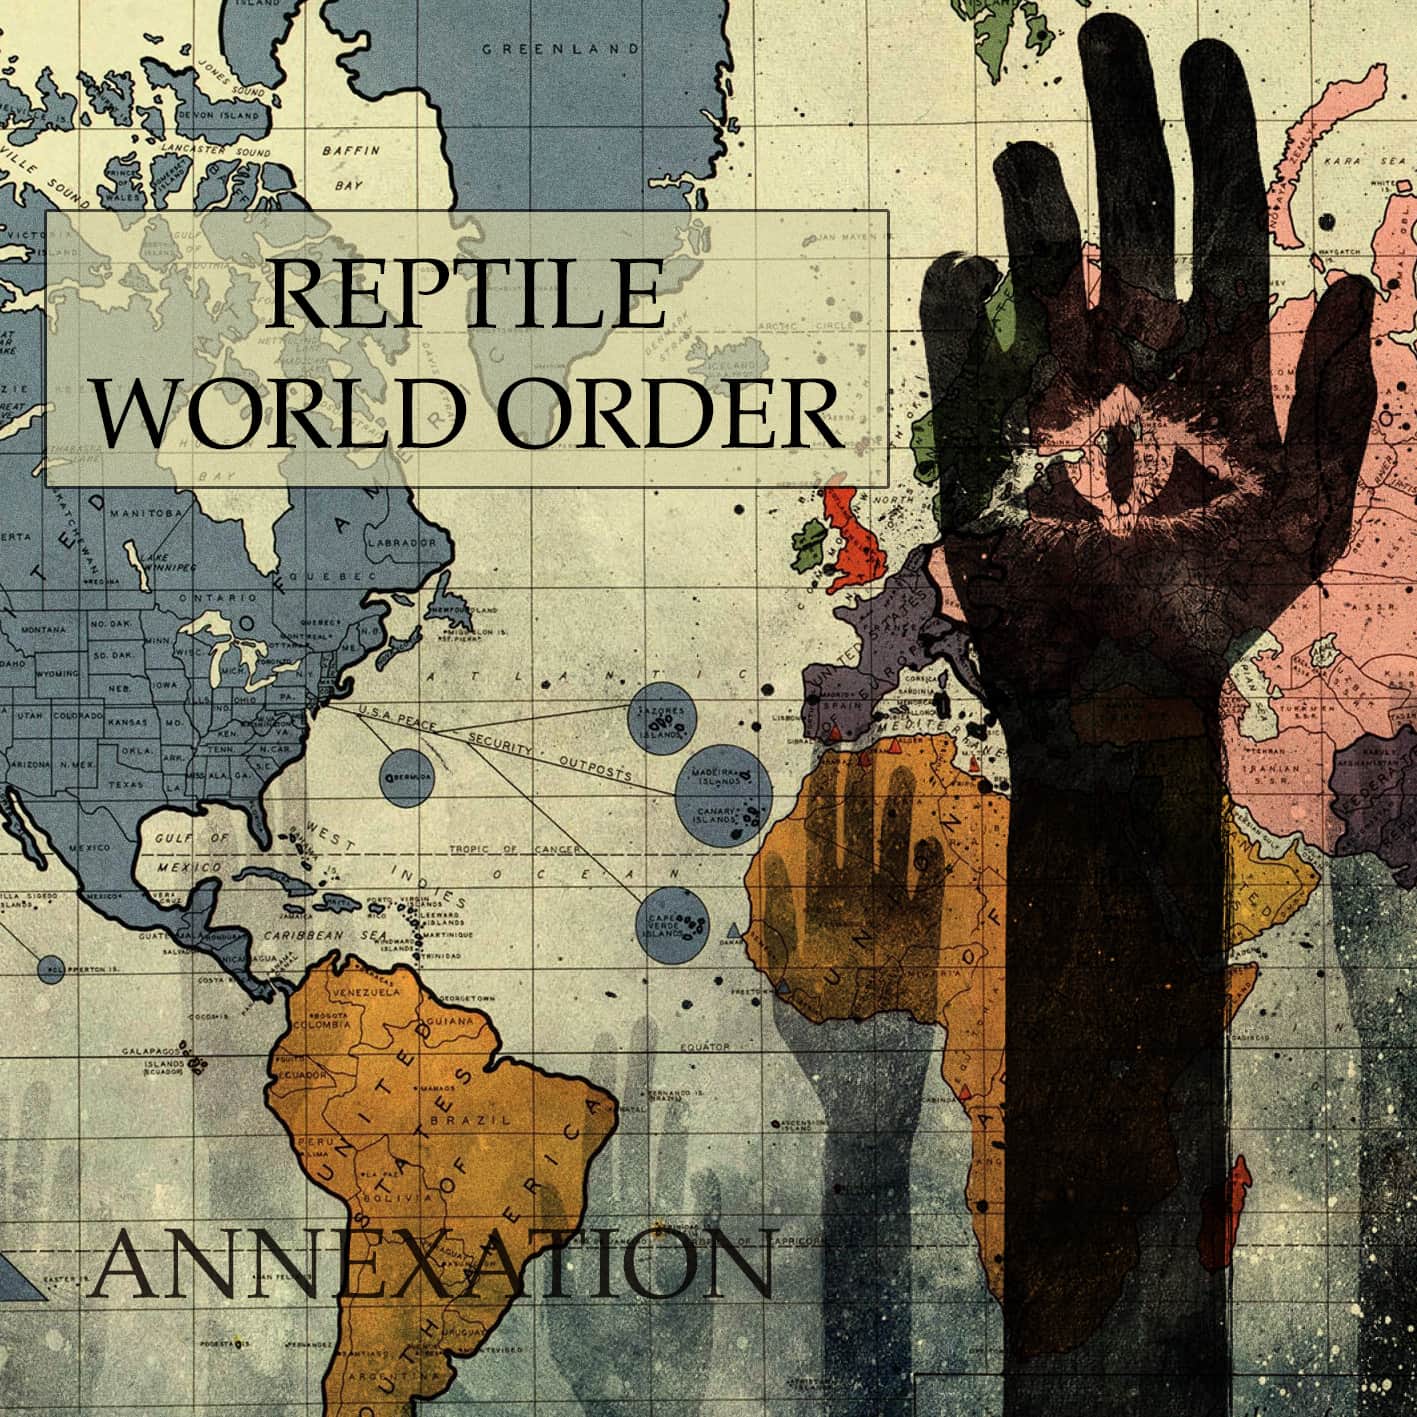 Reptile World Order - Annexation